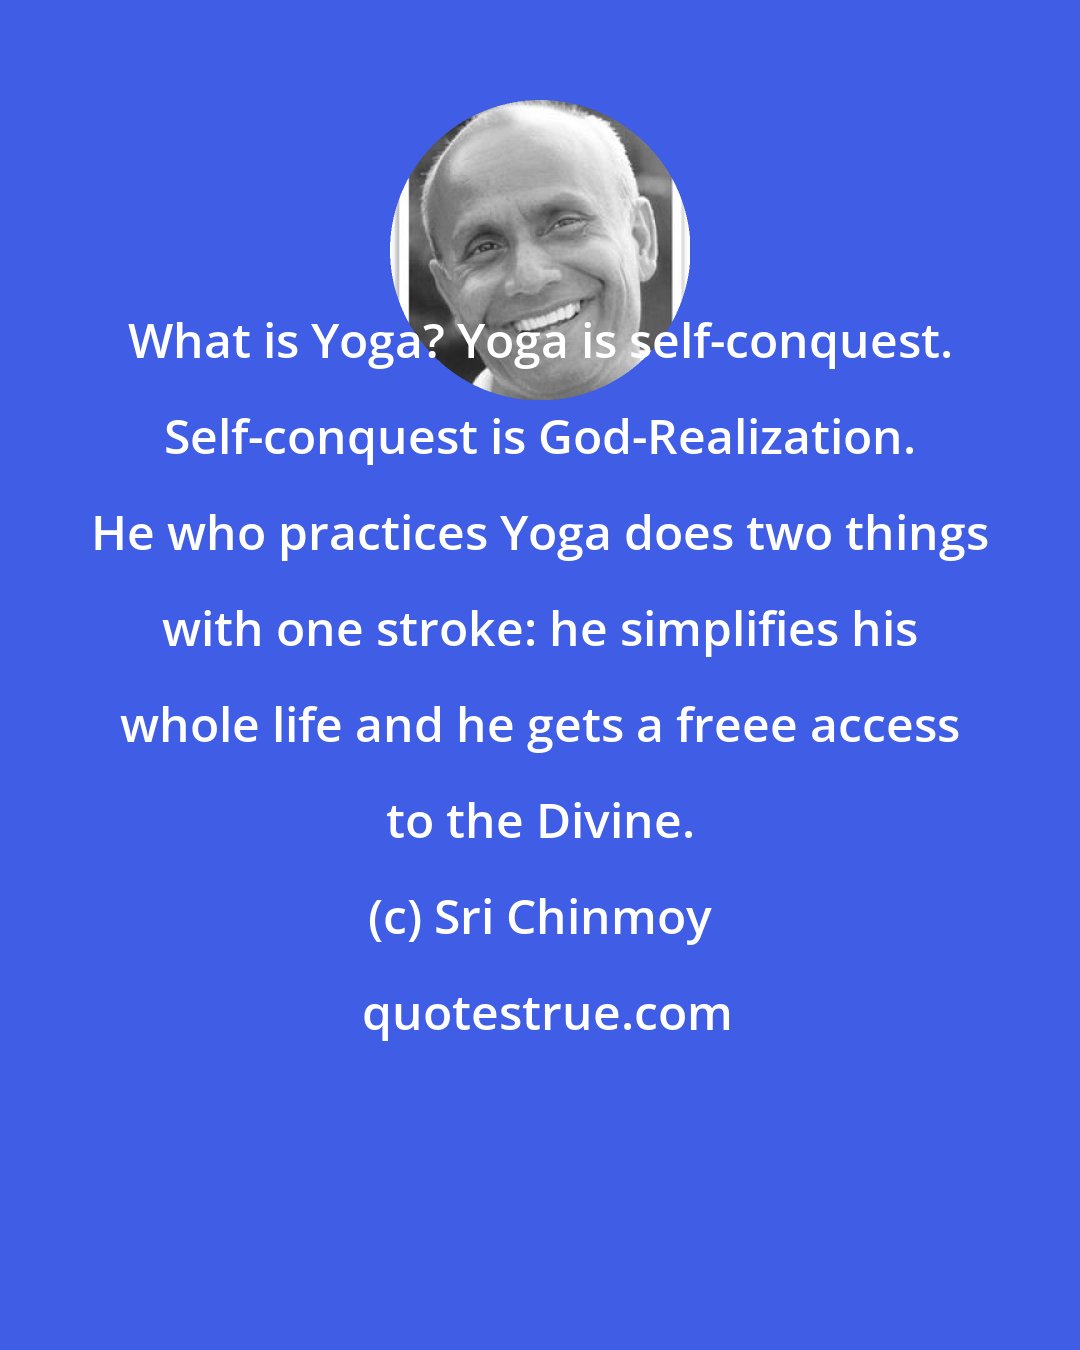 Sri Chinmoy: What is Yoga? Yoga is self-conquest. Self-conquest is God-Realization. He who practices Yoga does two things with one stroke: he simplifies his whole life and he gets a freee access to the Divine.